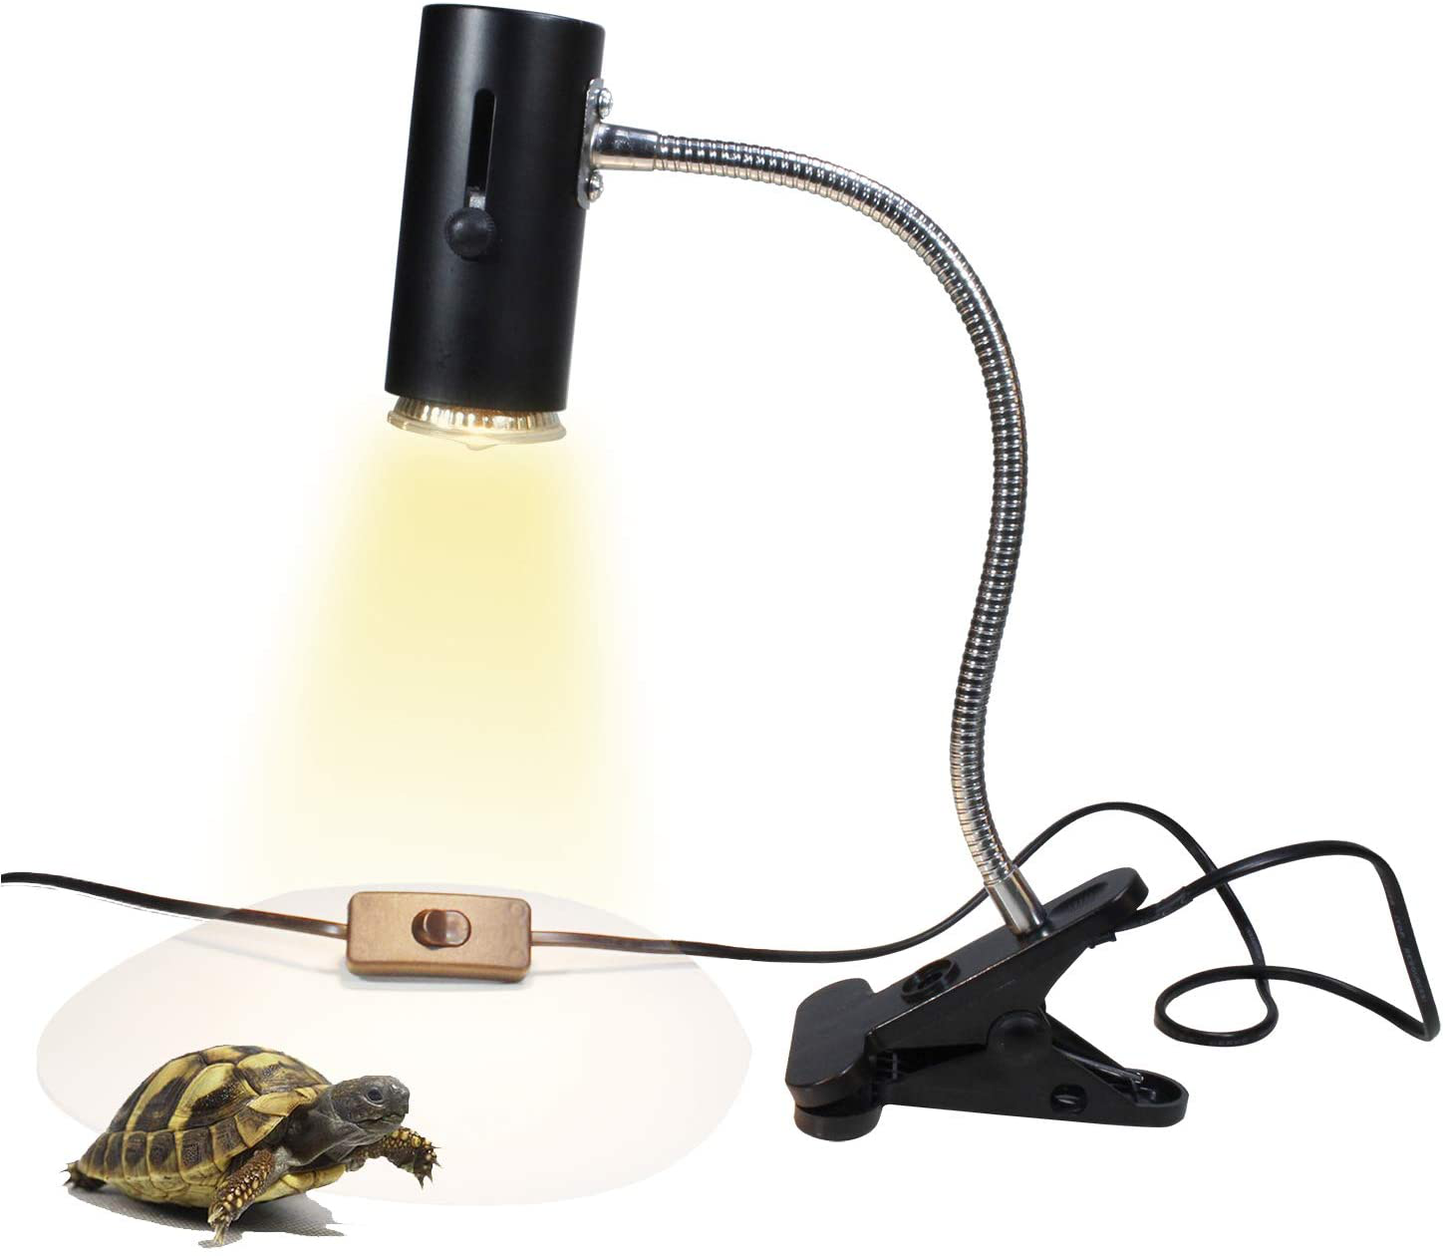 STBTECH Heat Lamp for Reptiles Turtle,Clamp Lamp Holder with 50W Halogen Bulb,Heating Lamp for Reptile and Amphibian Habitat Basking Animals & Pet Supplies > Pet Supplies > Reptile & Amphibian Supplies > Reptile & Amphibian Habitat Heating & Lighting STBTECH Long neck  